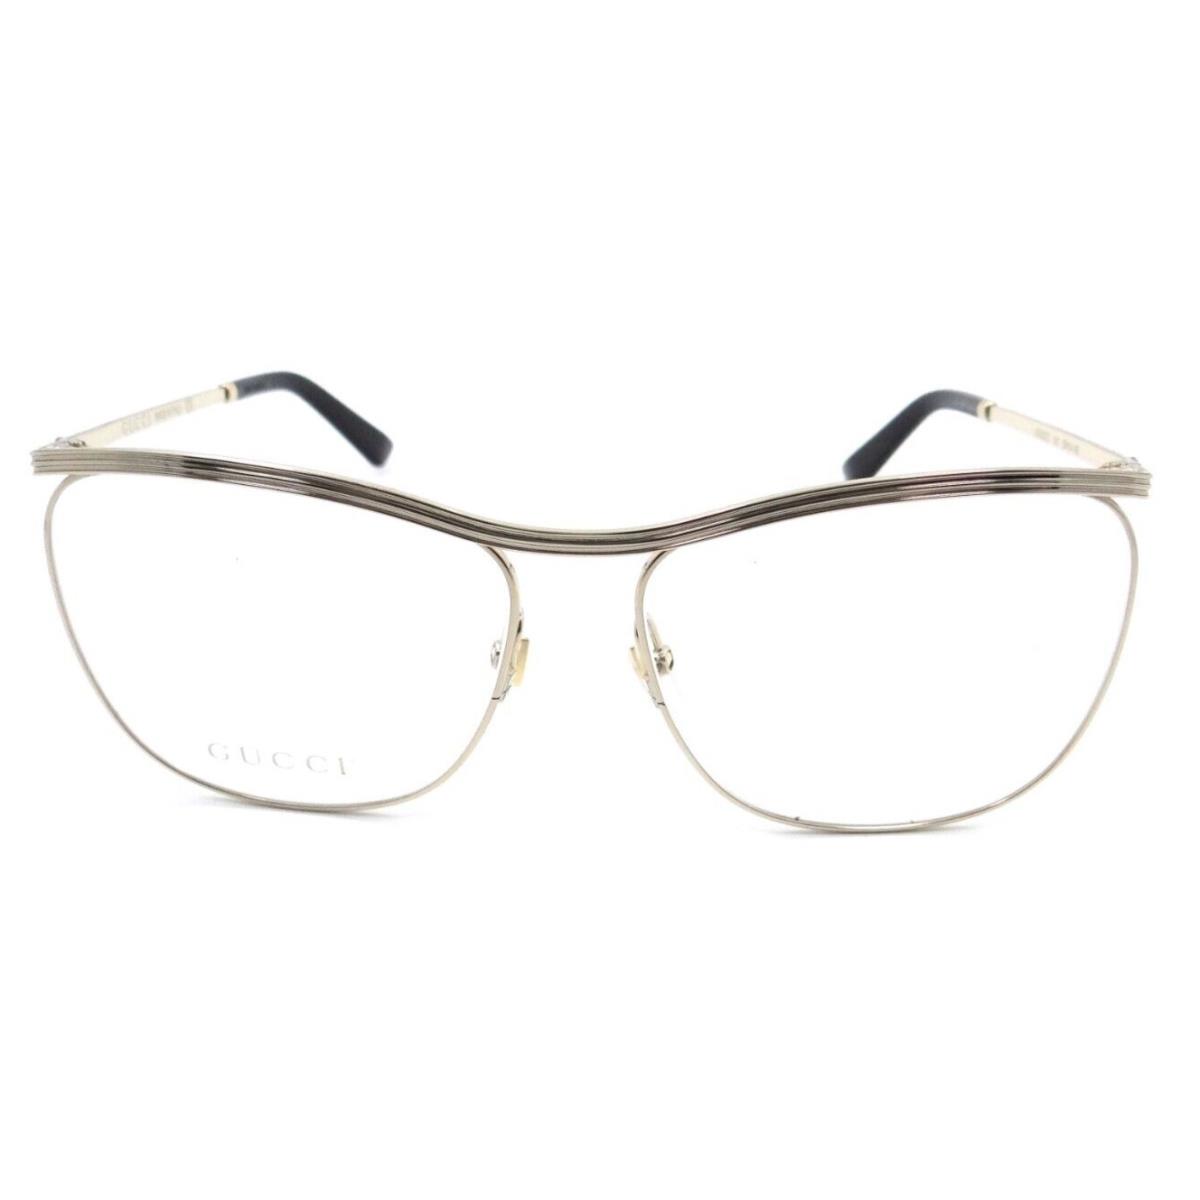 Gucci Eyeglasses Frames GG0822O 001 58-14-145 Gold Made in Italy